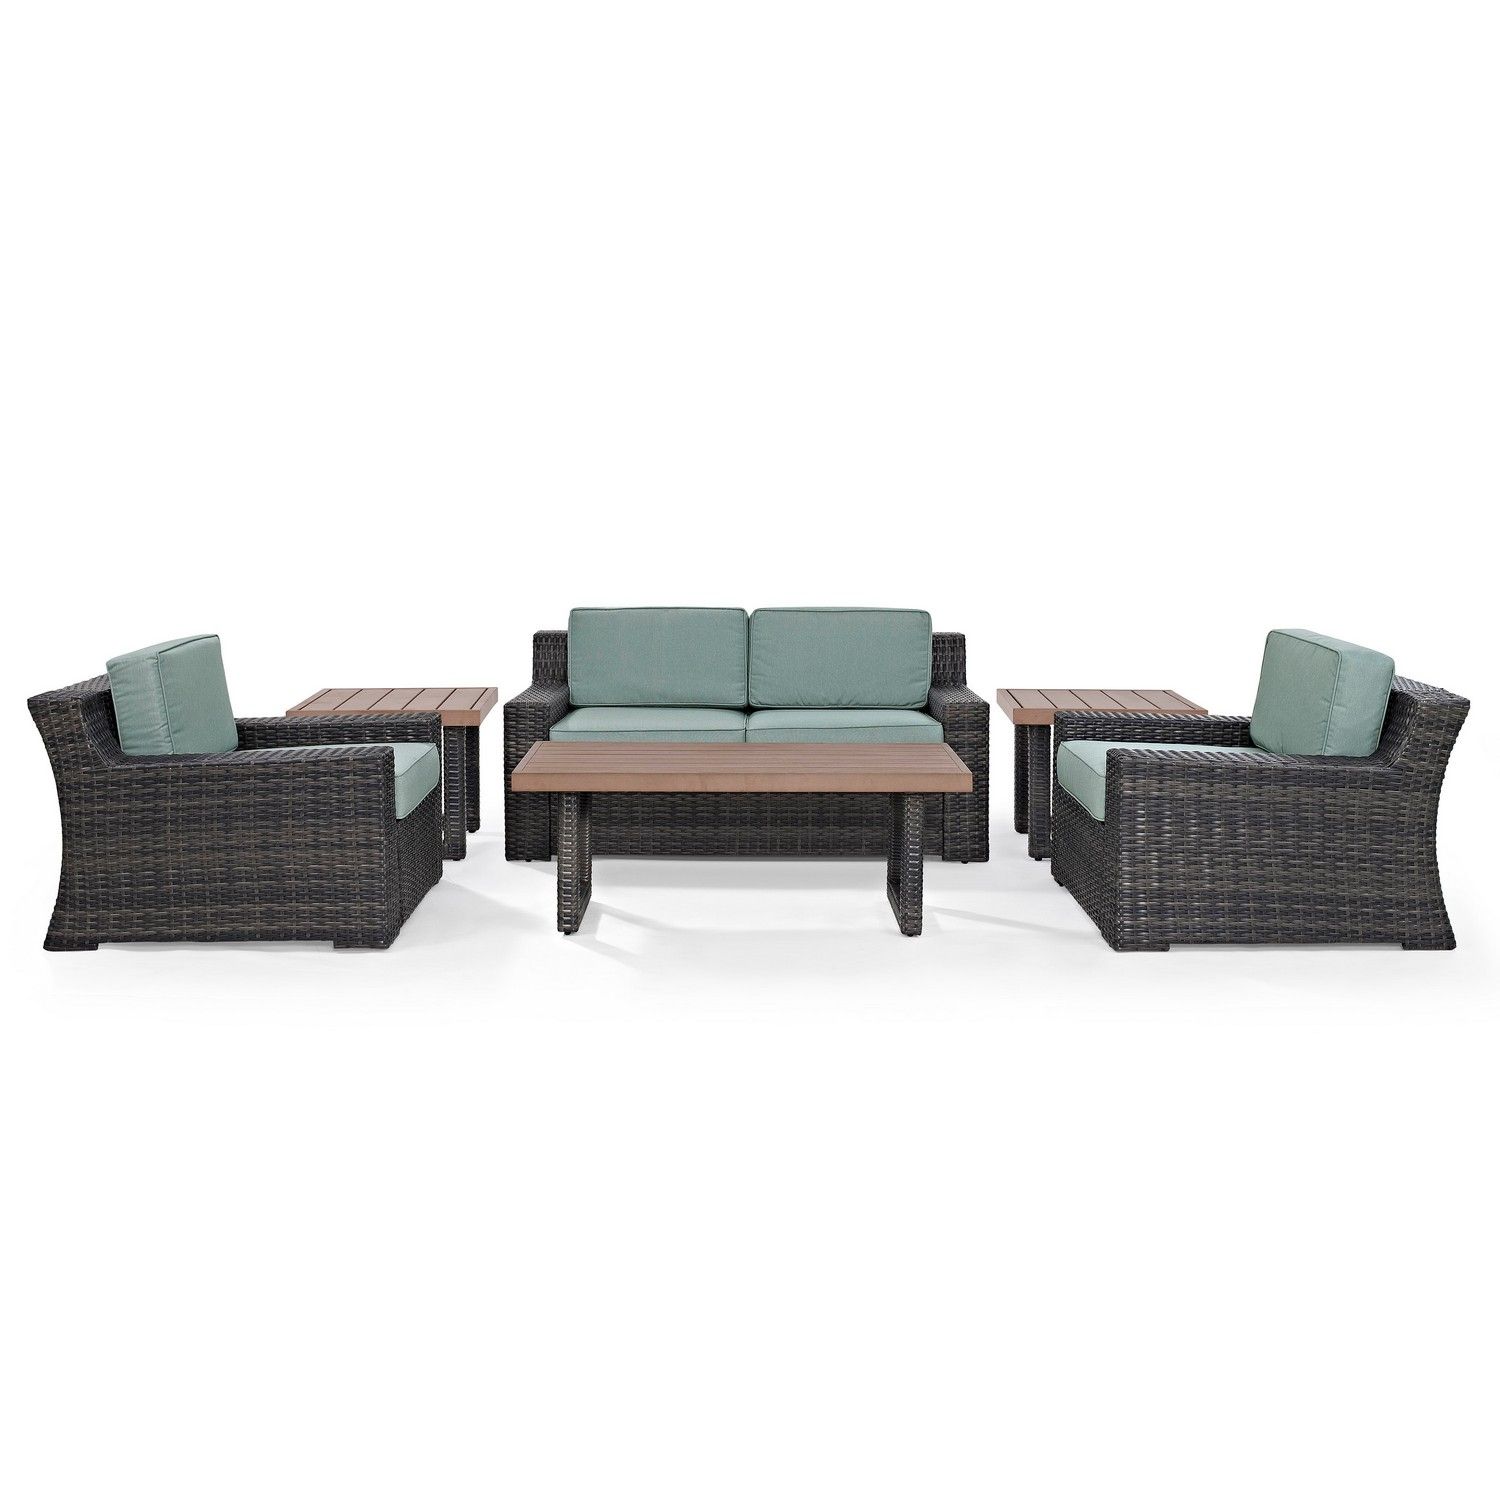 Crosley Beaufort 6-PC Outdoor Wicker Conversation Set - Loveseat, 2 Chairs, Coffee Table, 2 Side Tables - Mist/Brown